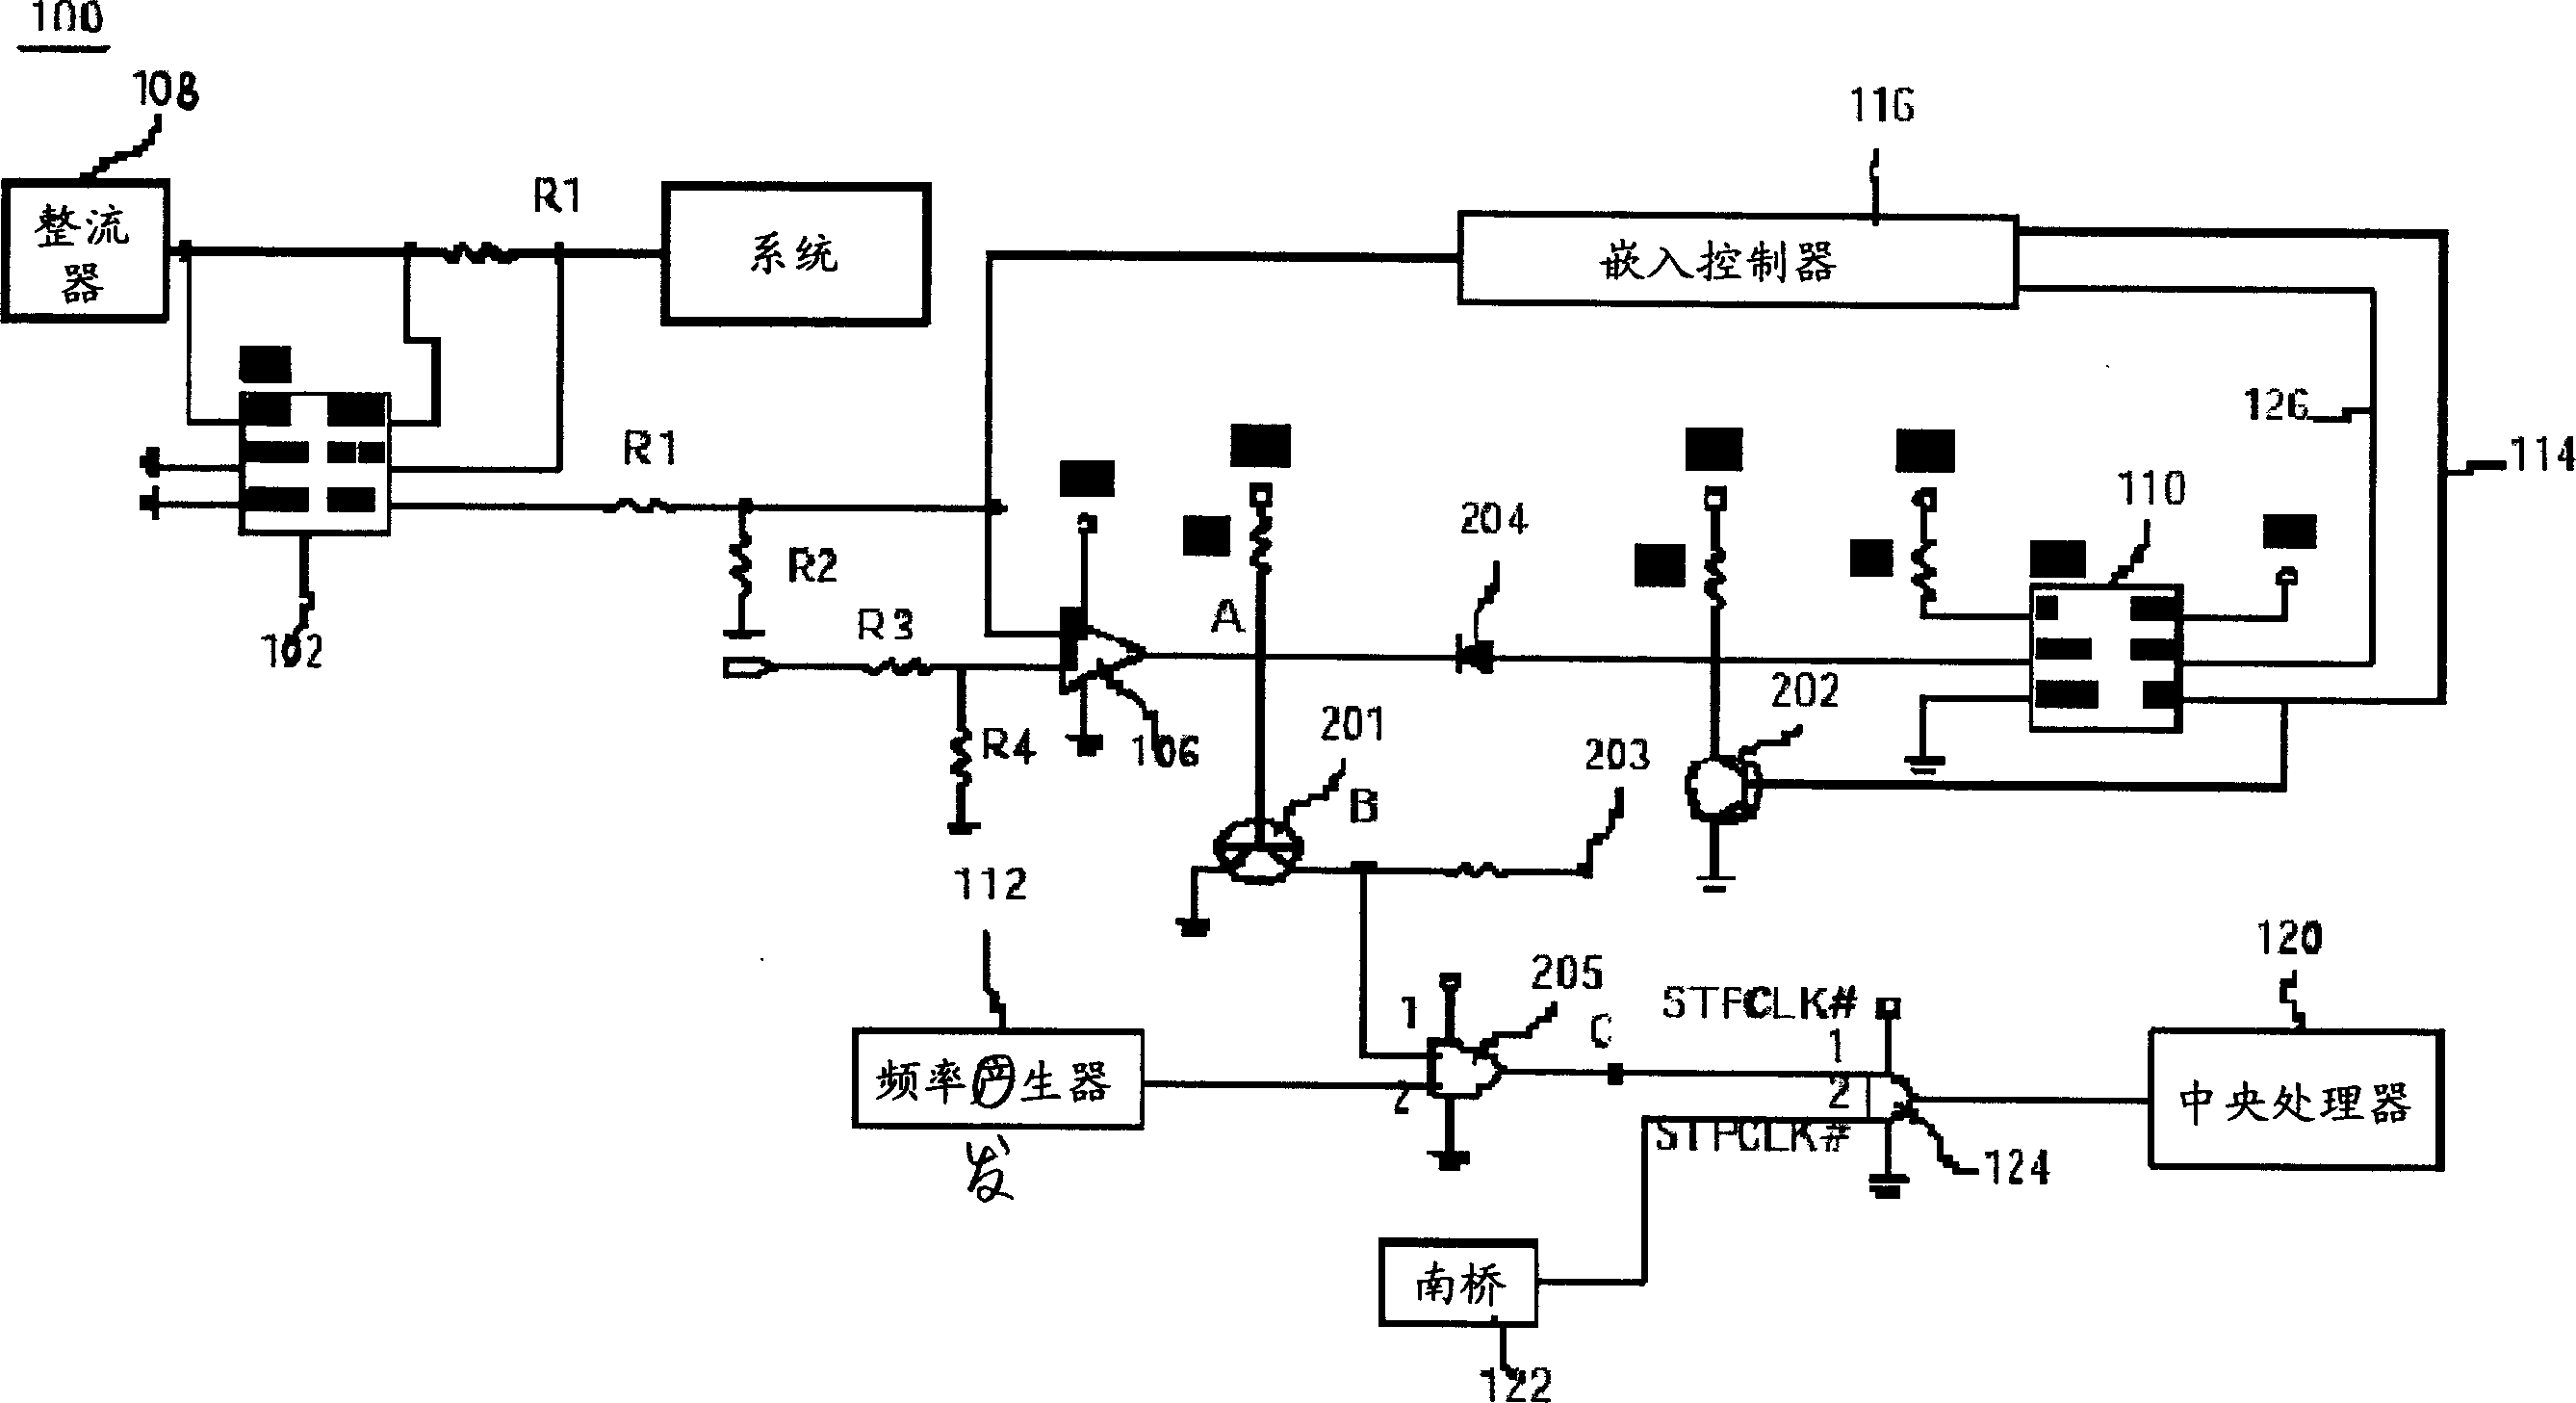 Apparatus for dynamically regulating computer system power consumption